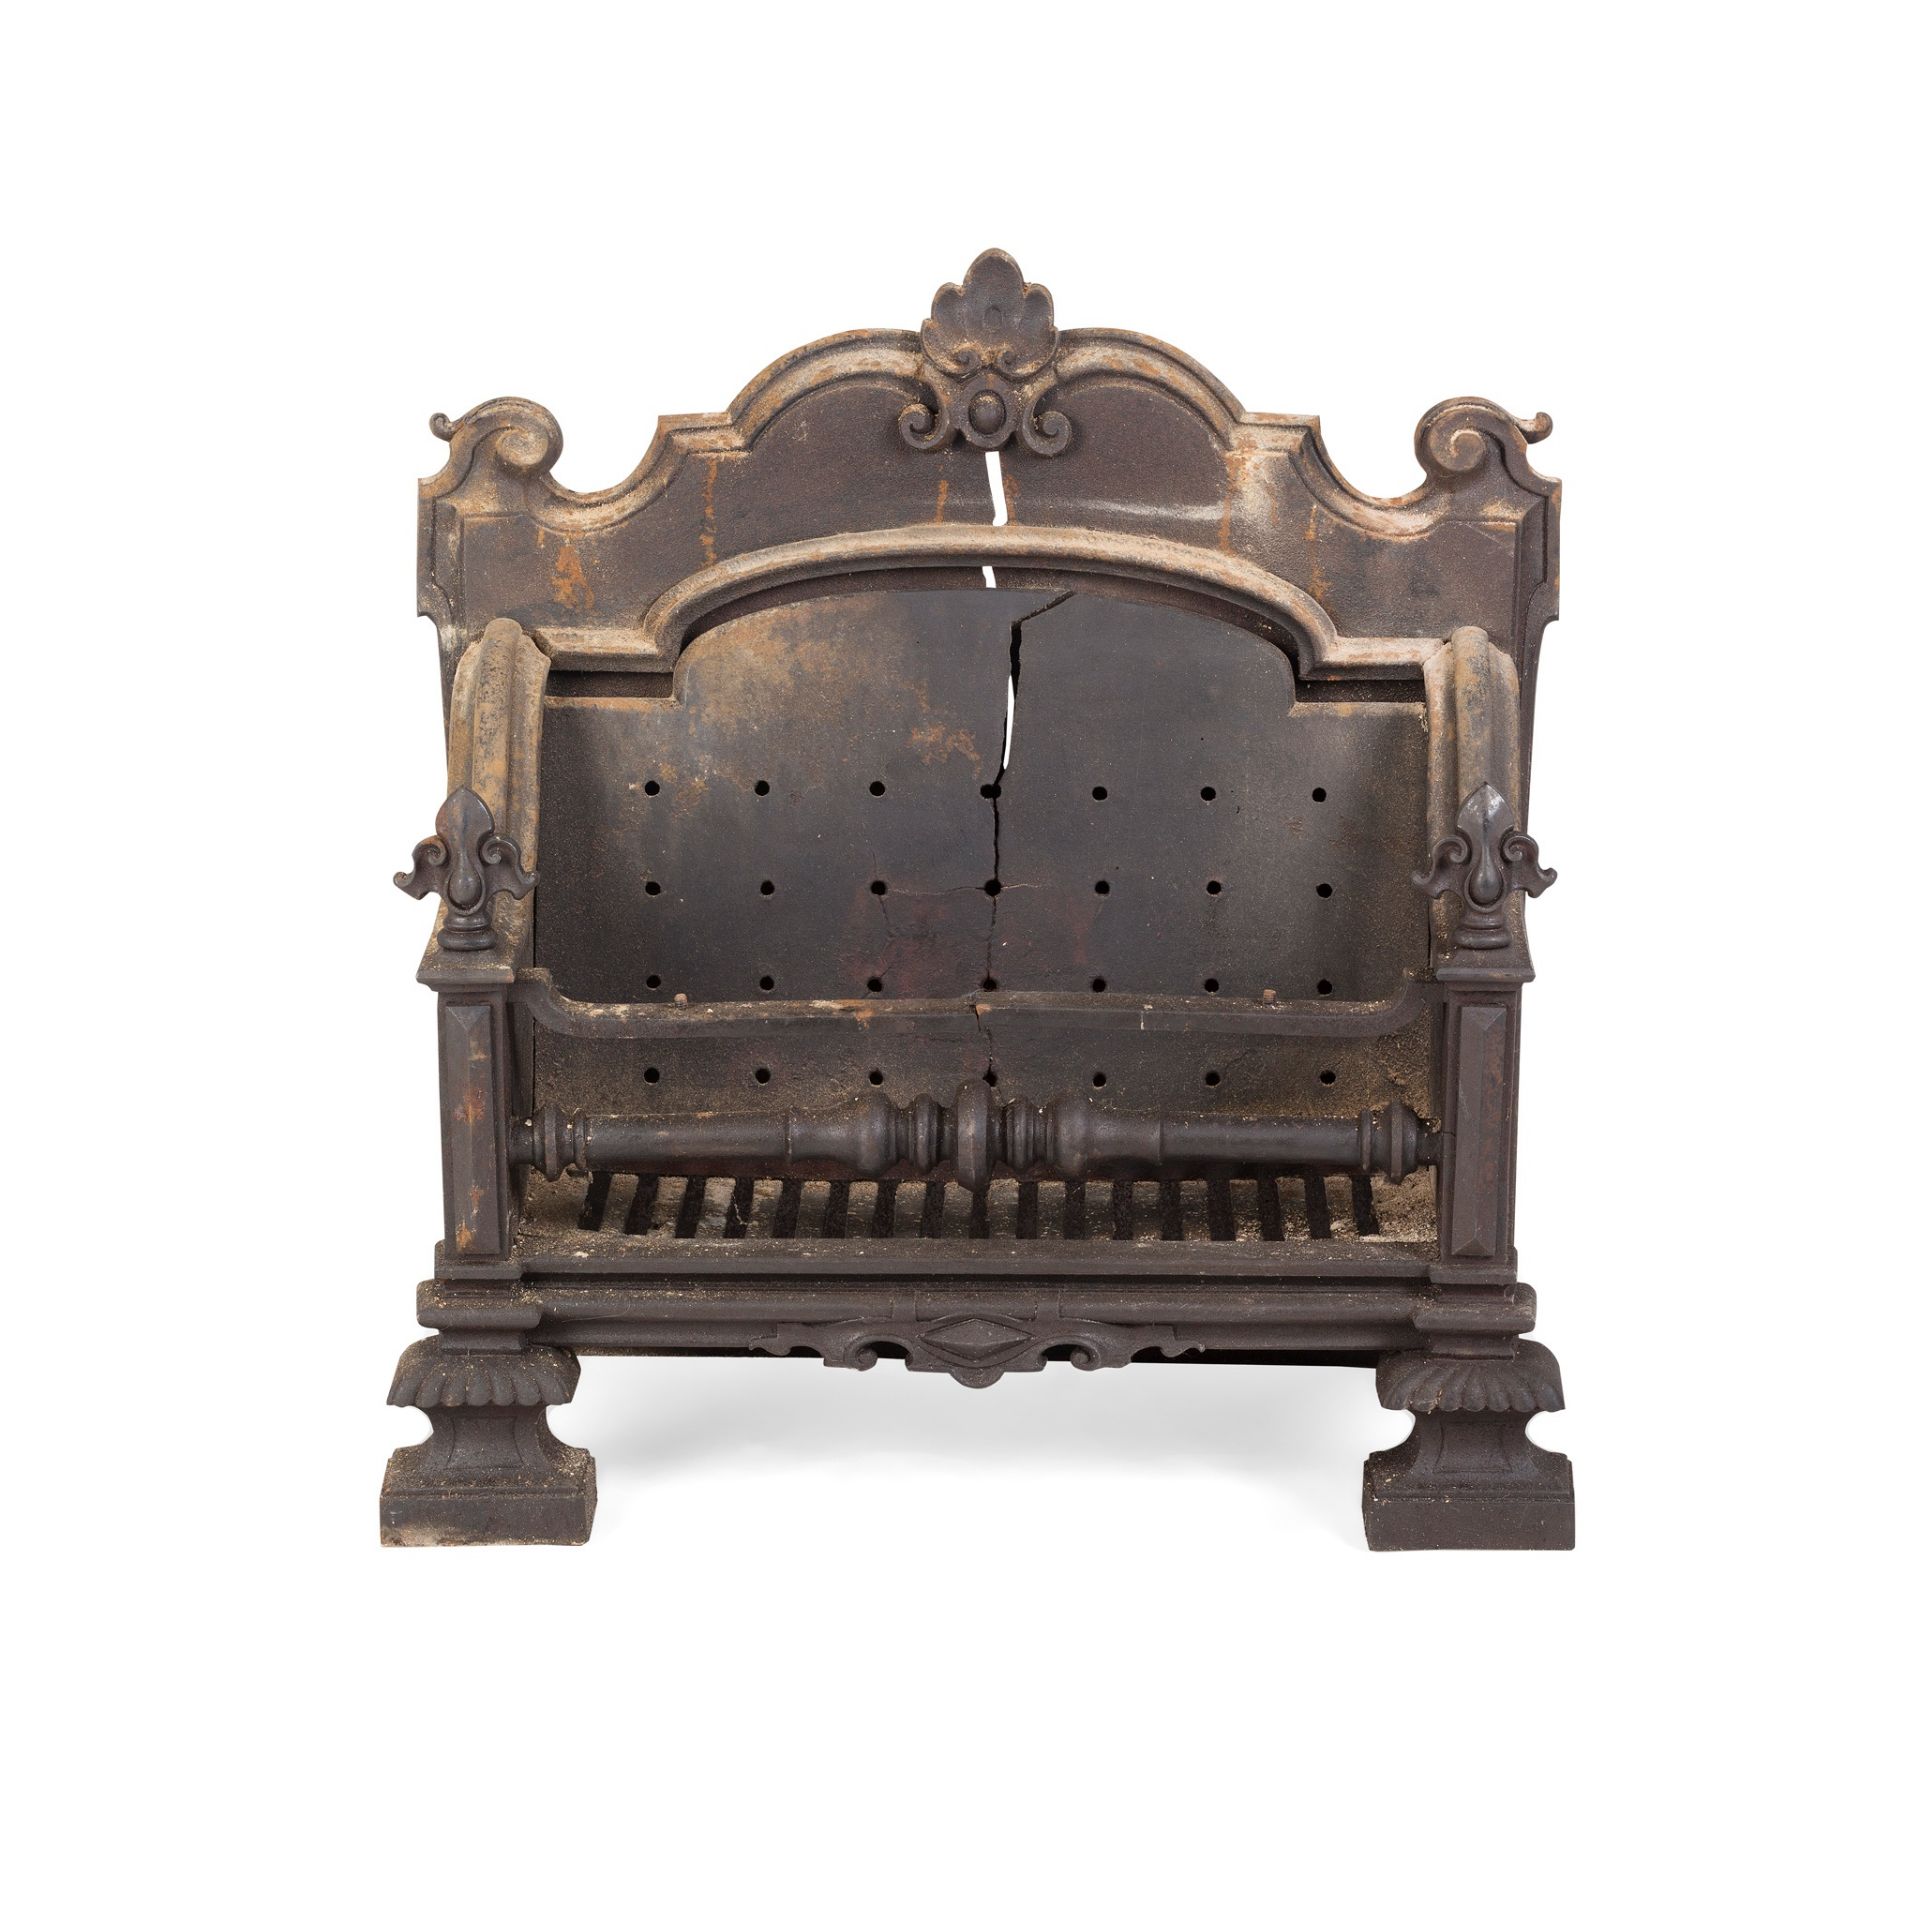 LATE REGENCY CAST IRON FIRE GRATE EARLY 19TH CENTURY